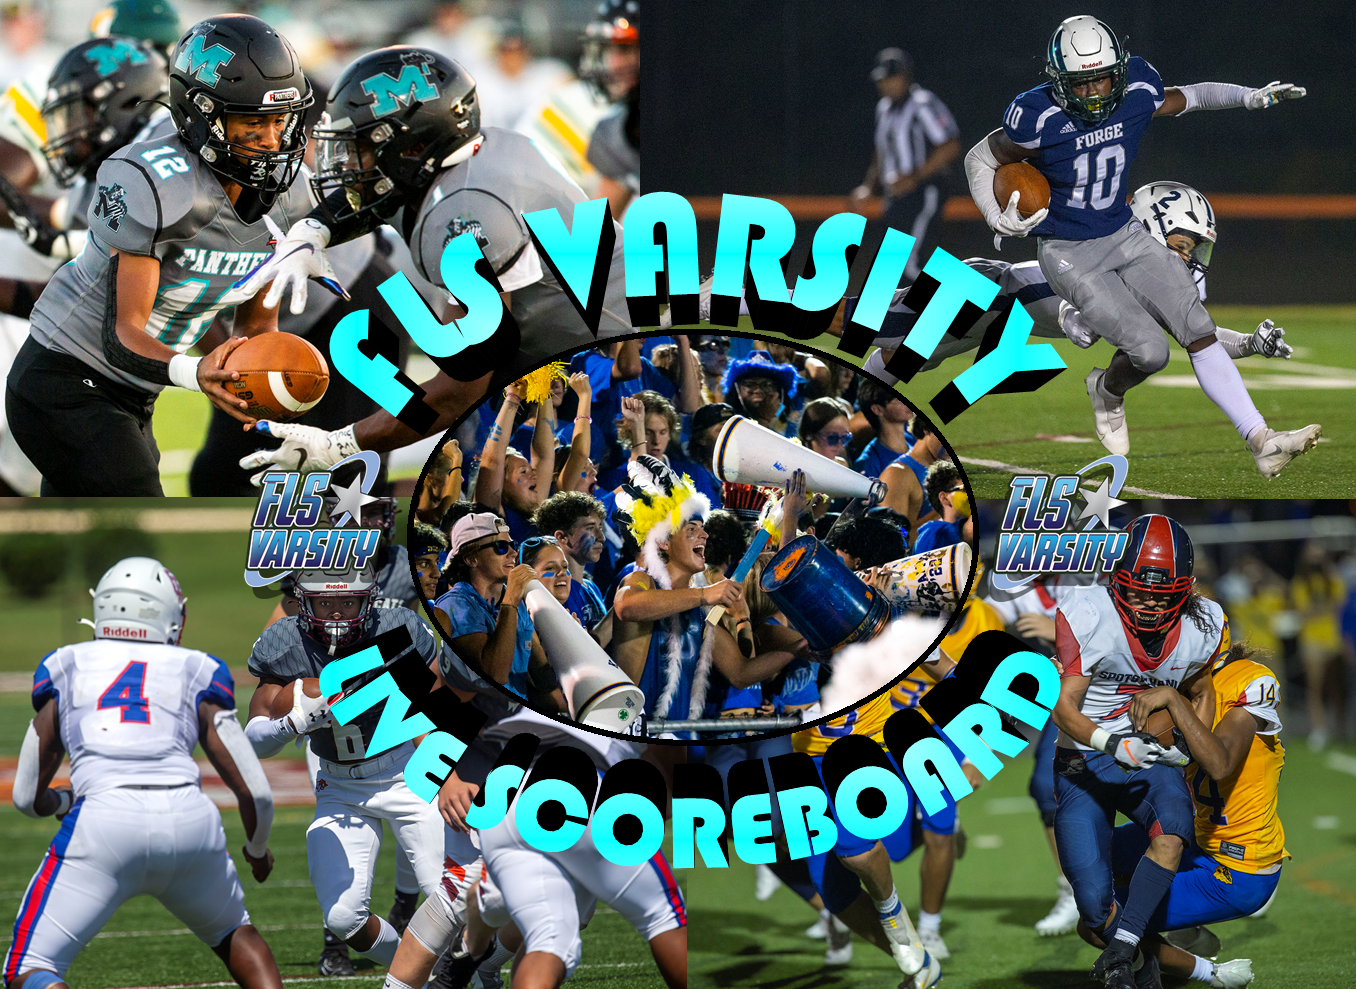 Stay Updated on High School Football Games and Scores with Live Scoreboard and Coverage